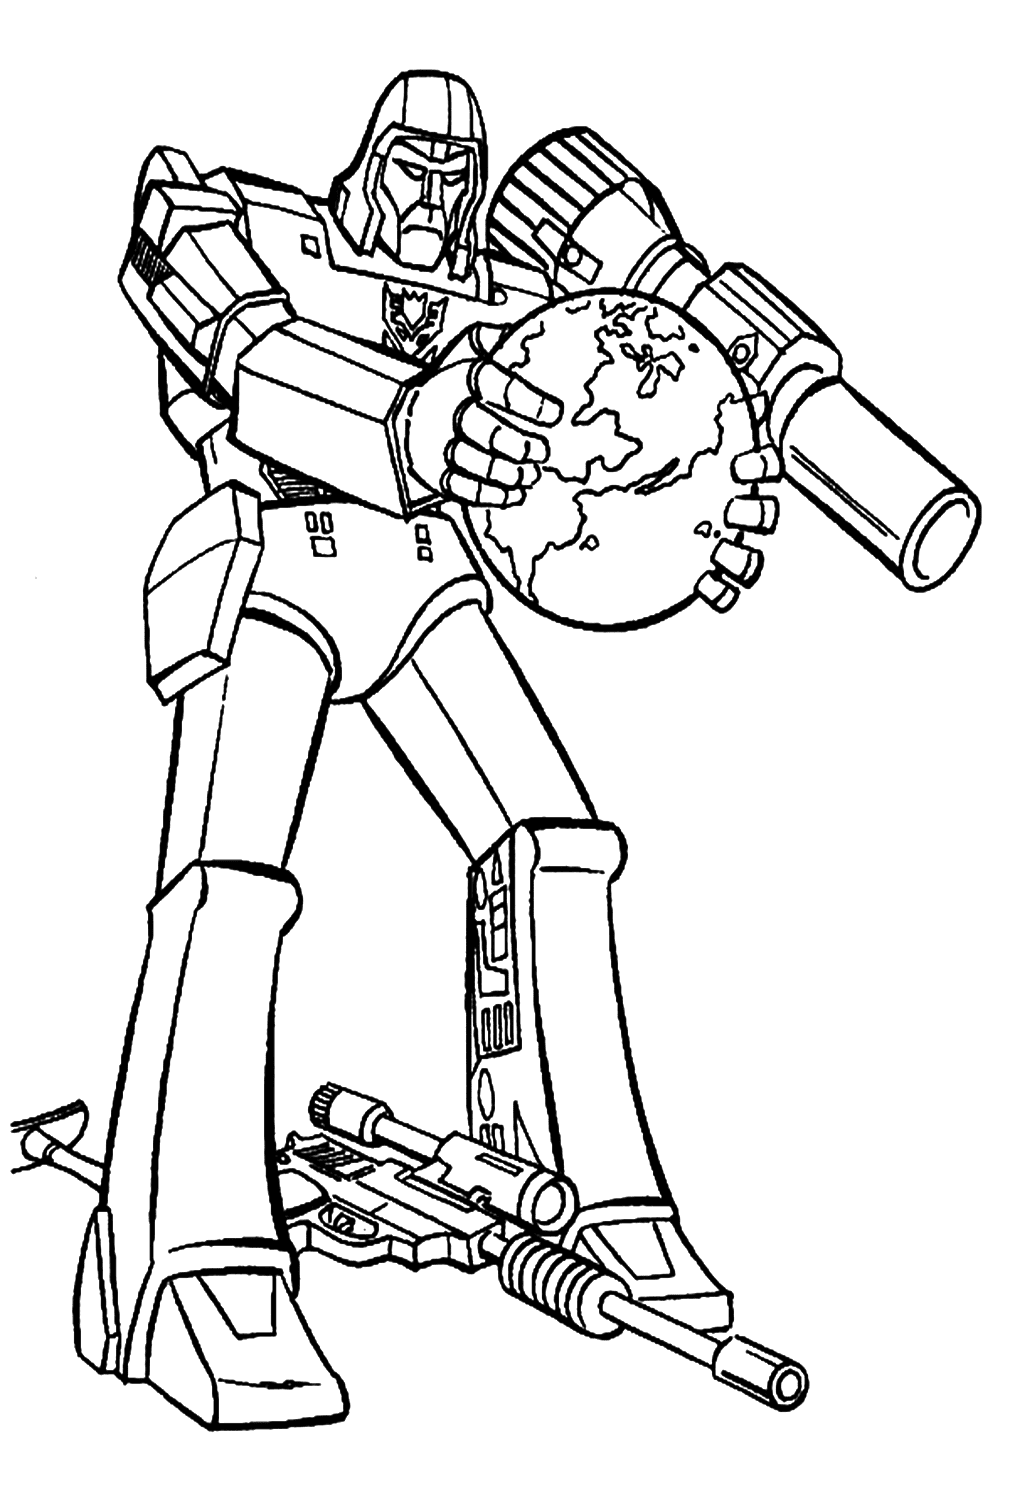 Megatron Holding The World Coloring Page